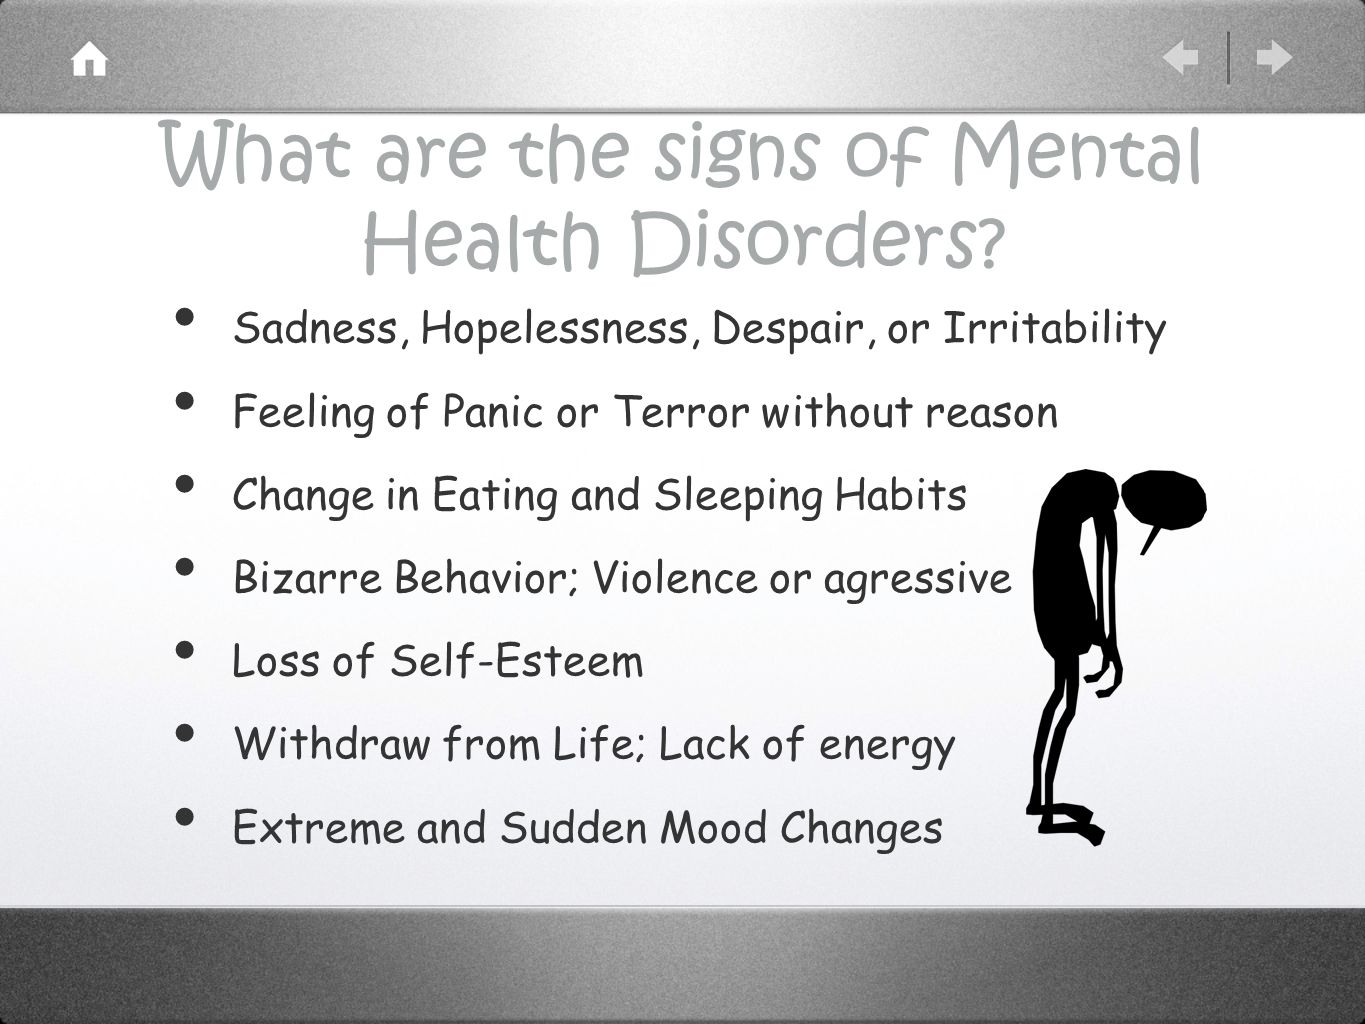 What are the signs of Mental Health Disorders.